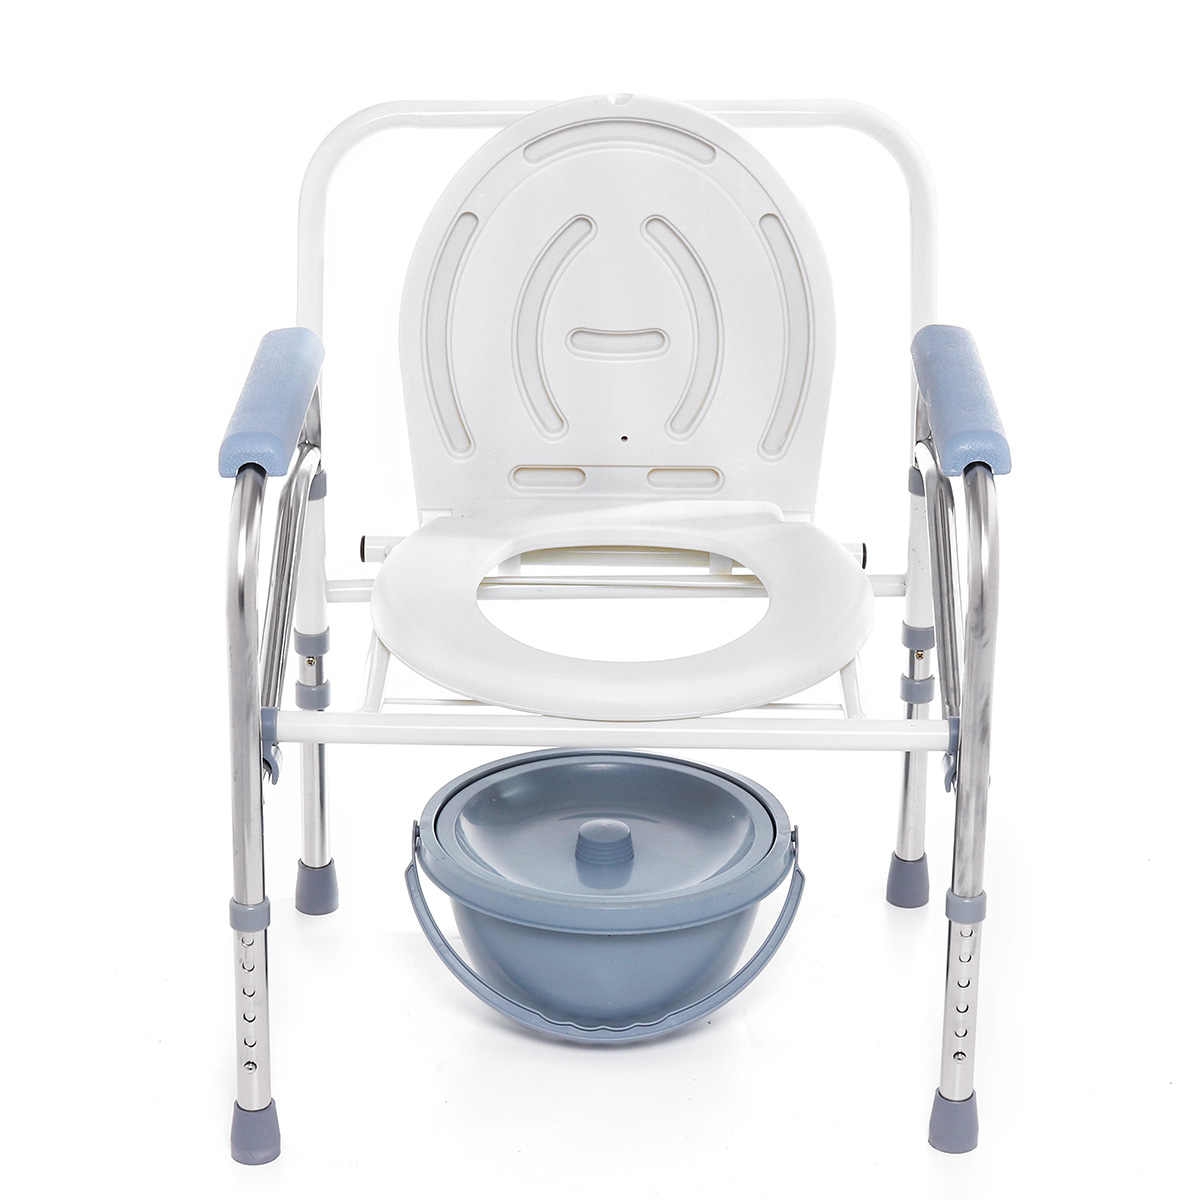 

Portable Foldable Potty Chair Toilet Adjustable Commode Chair Closestool Chamber Pot For Elderly Women